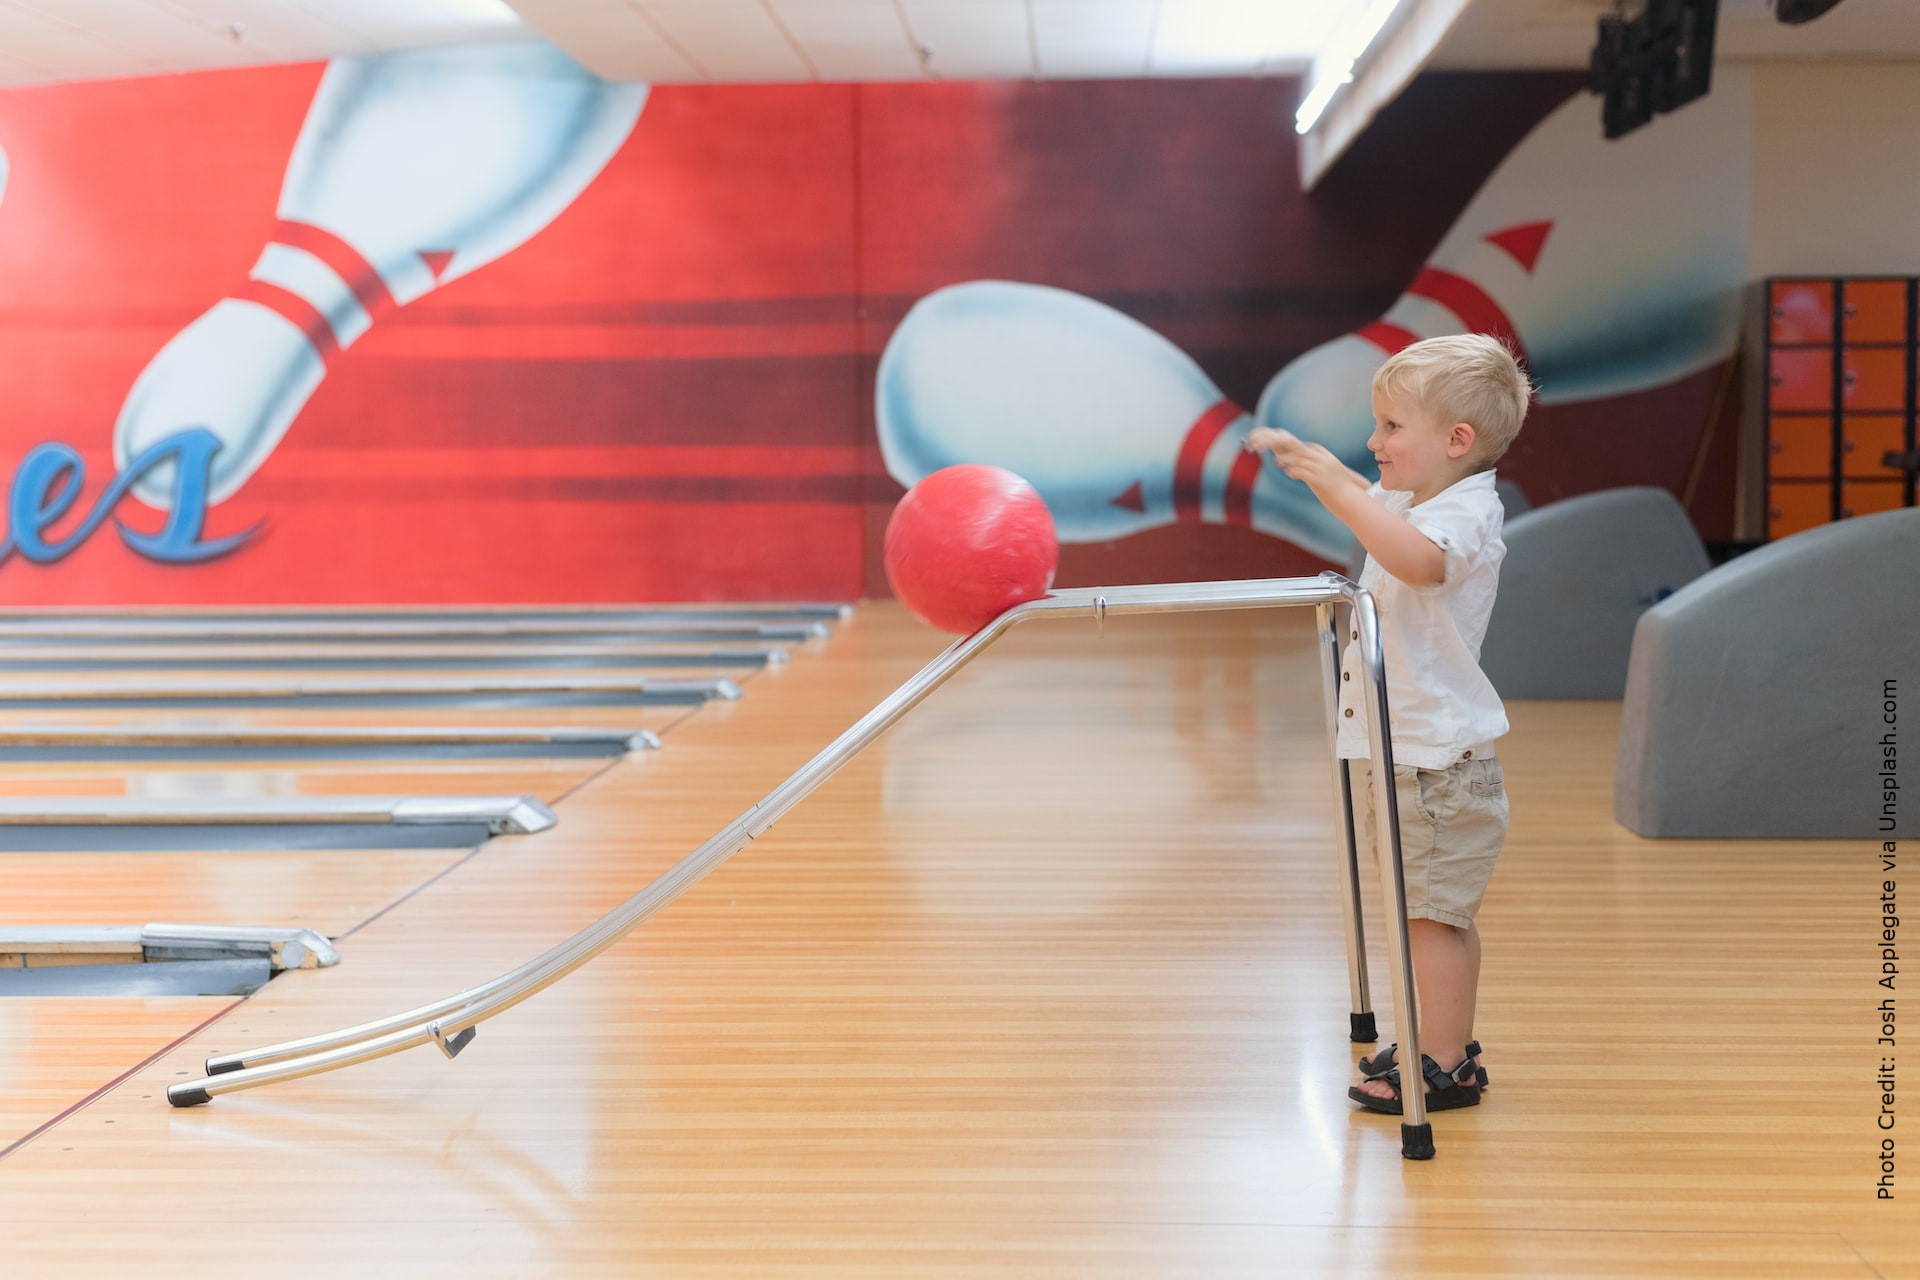 The image shows a young boy using a rack to bowl.